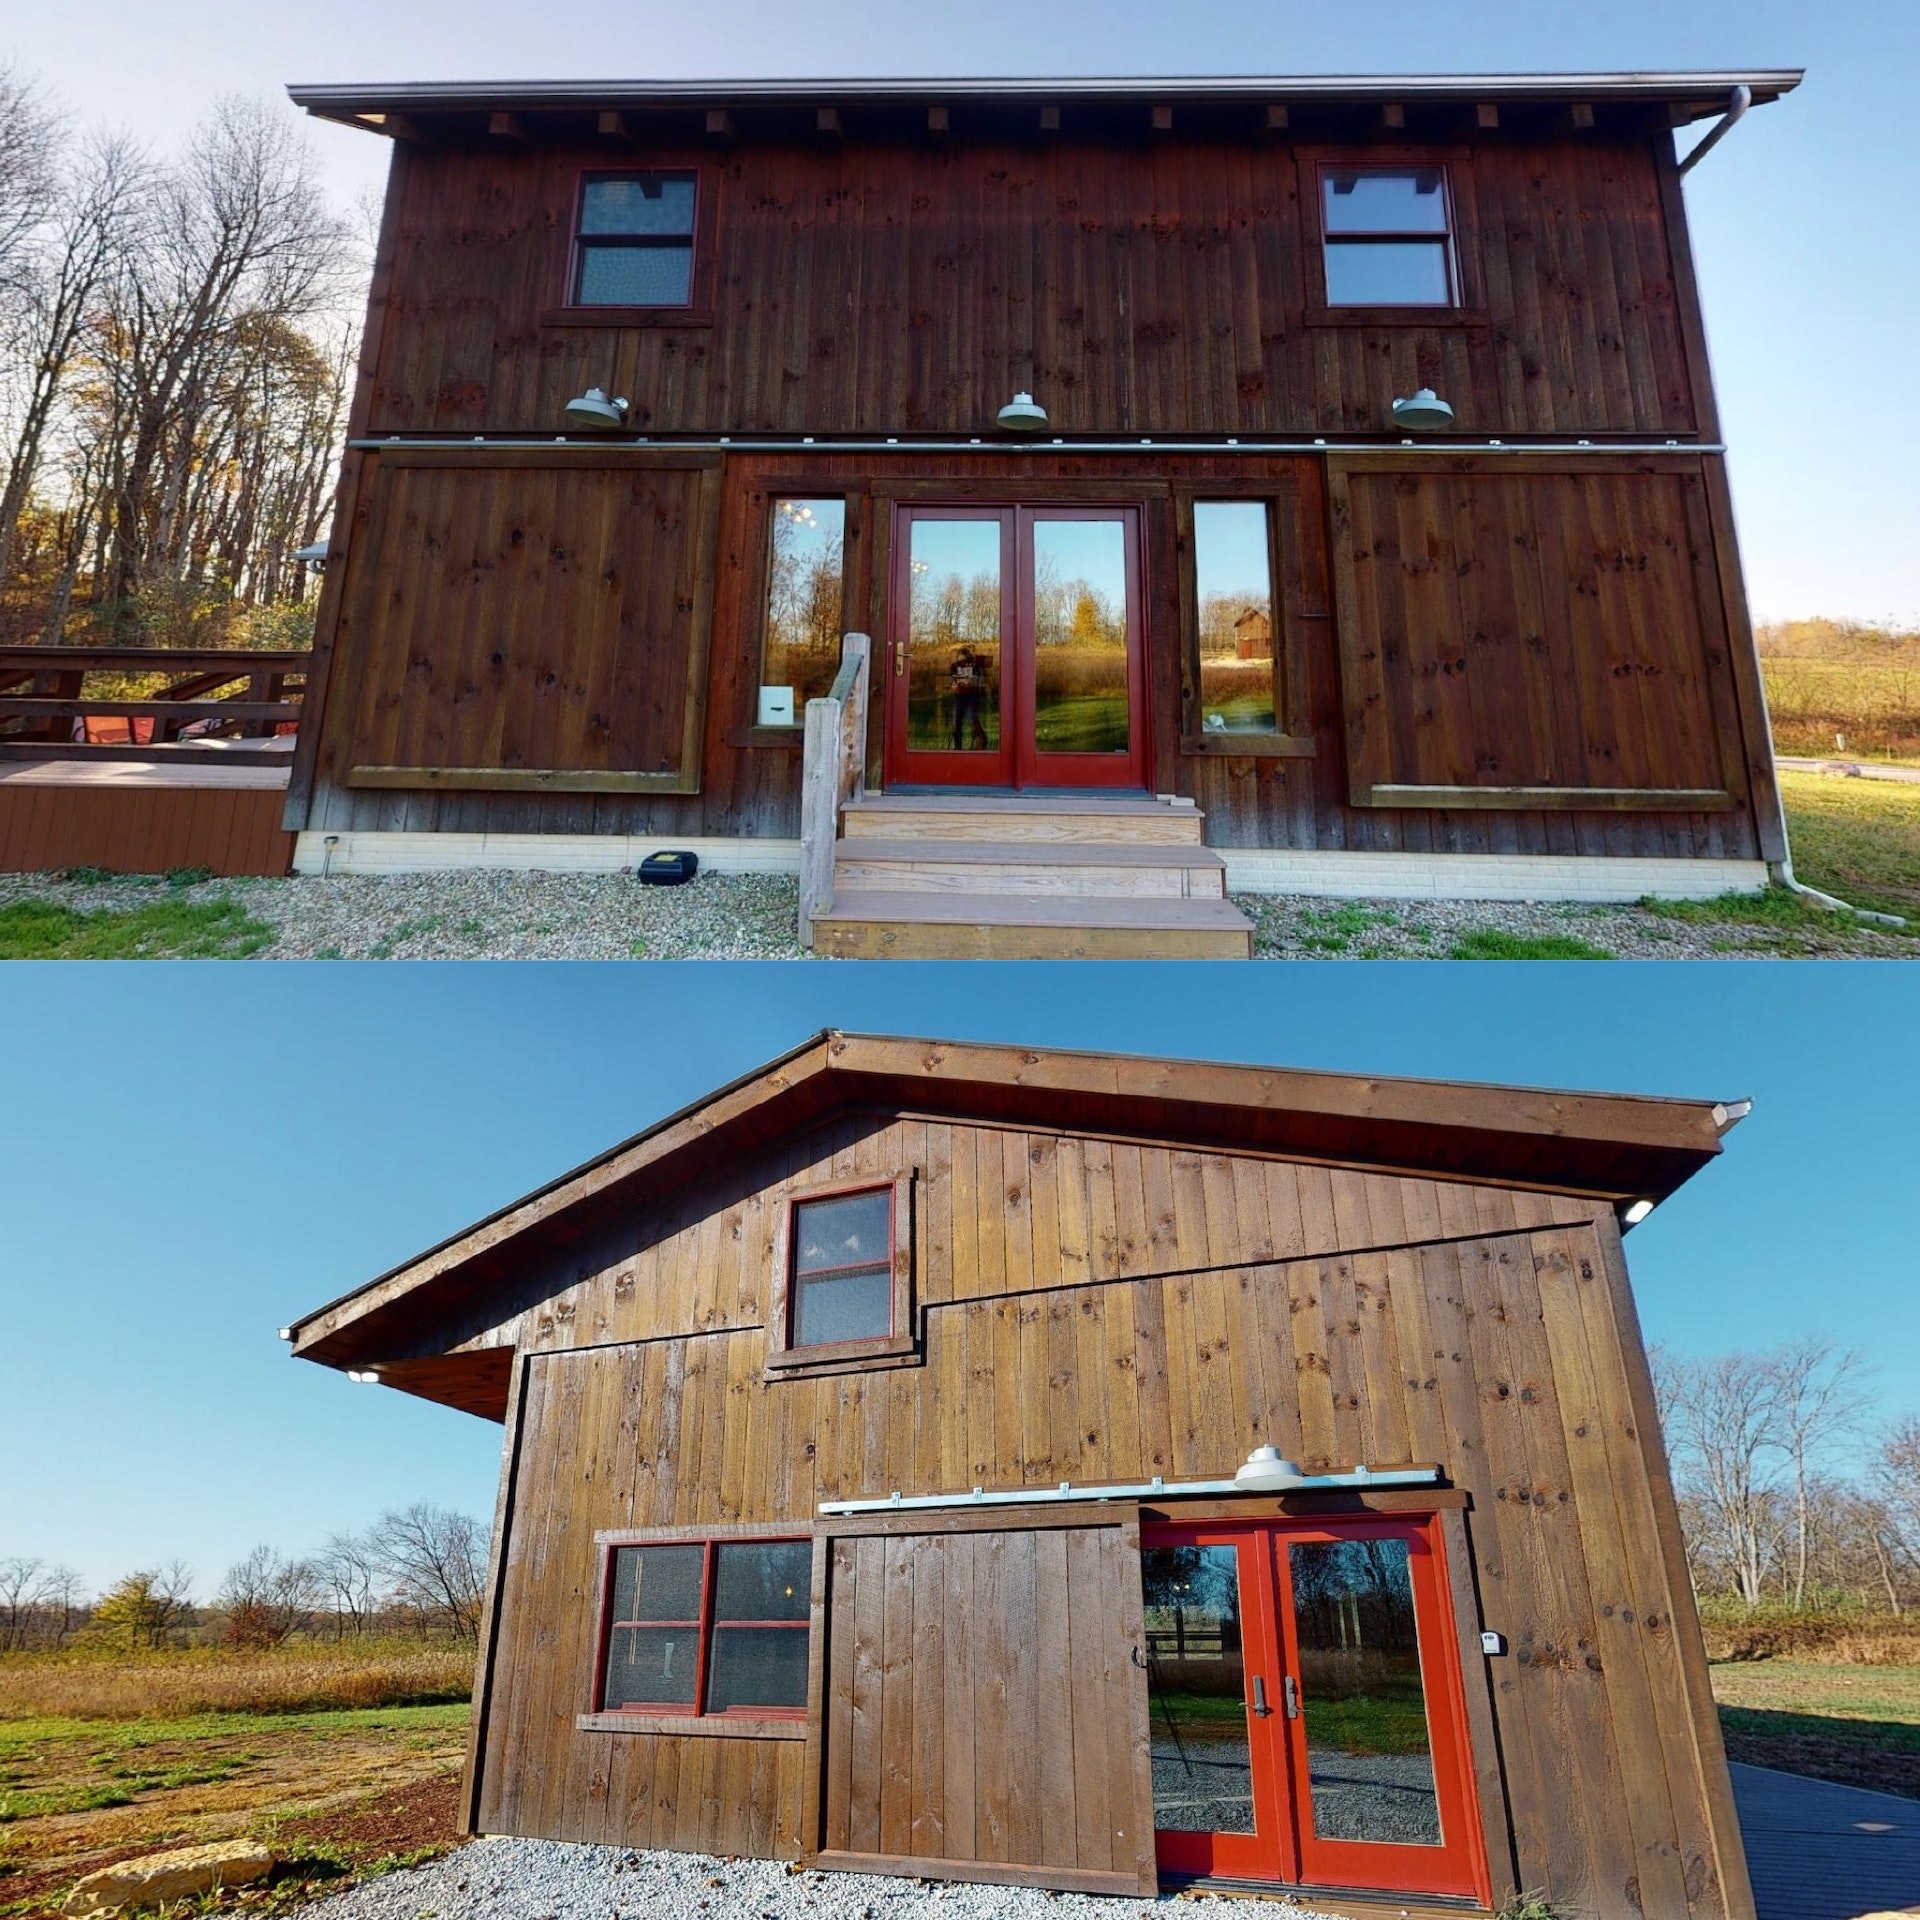 The Barn  Stable at Pumpkin Ridge Resort - Boasting TWO separate cabins renting as one reservation. 95 acres of land, 7 miles of hiking trails, and so much more luxuriousness you